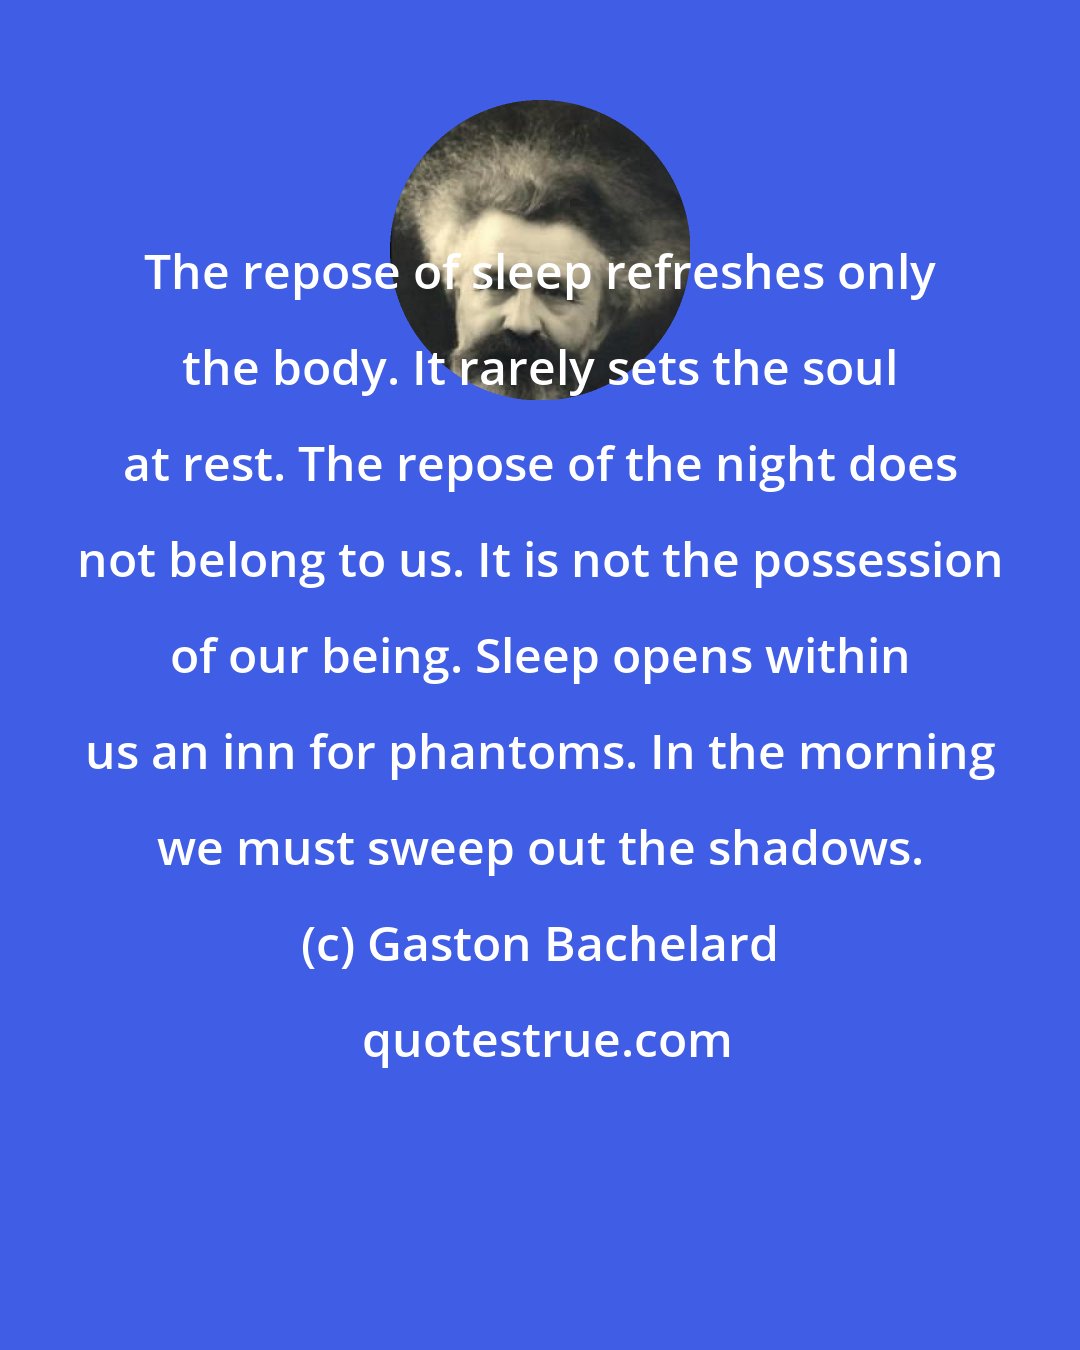 Gaston Bachelard: The repose of sleep refreshes only the body. It rarely sets the soul at rest. The repose of the night does not belong to us. It is not the possession of our being. Sleep opens within us an inn for phantoms. In the morning we must sweep out the shadows.